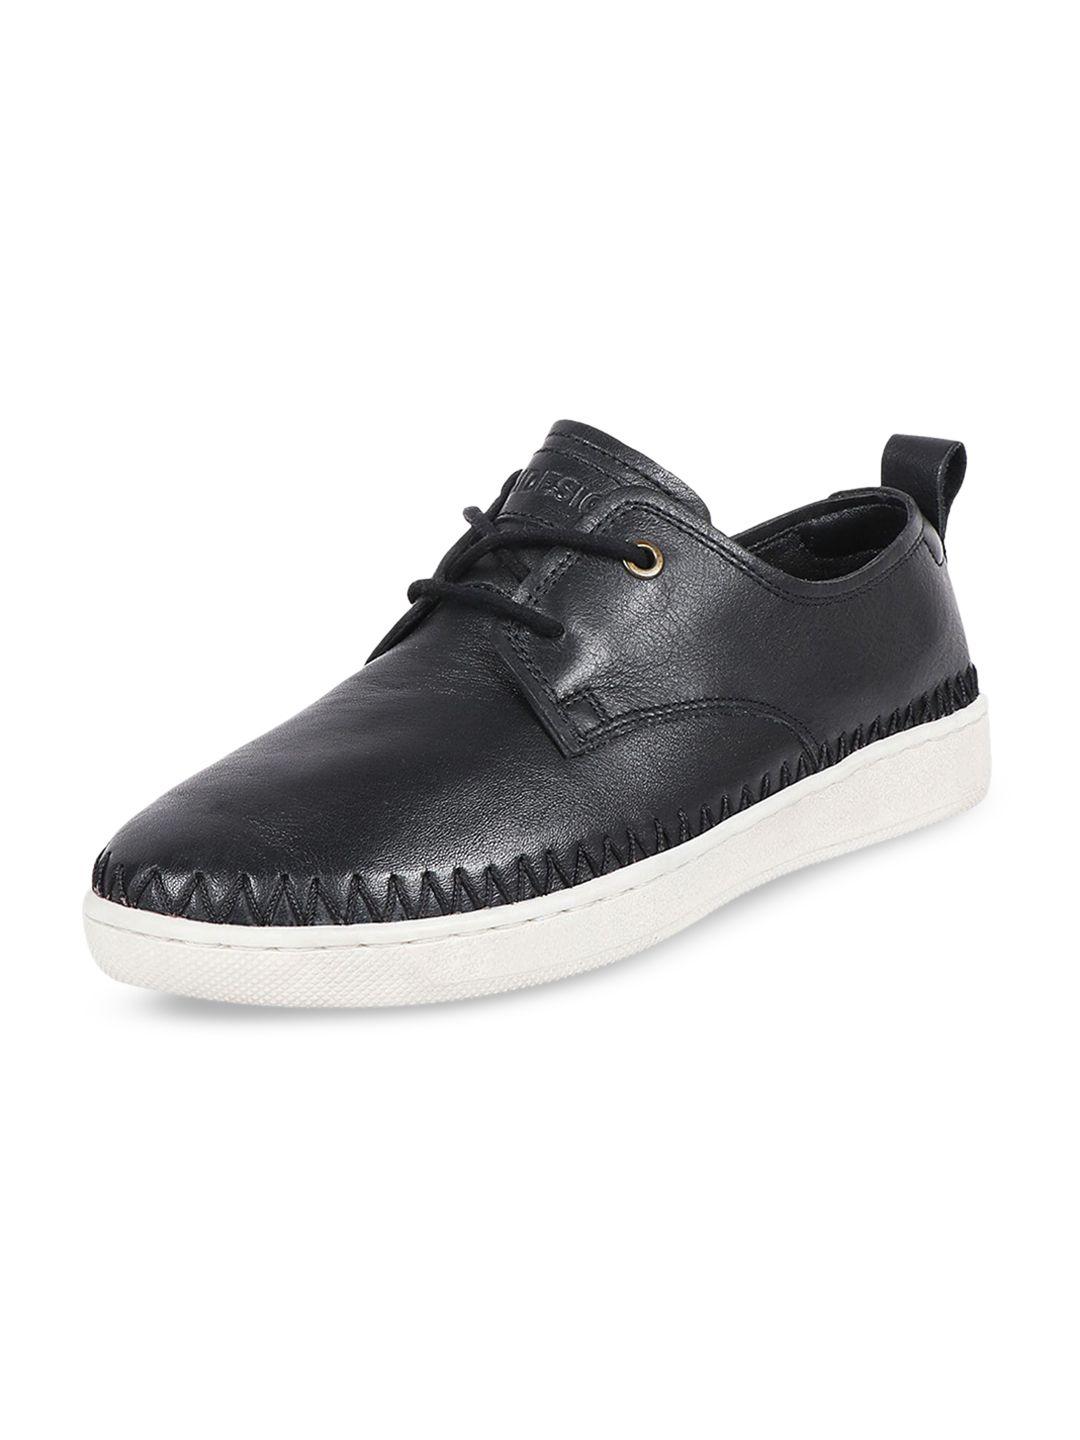 hidesign-women-andes-leather-comfort-insole-sneakers